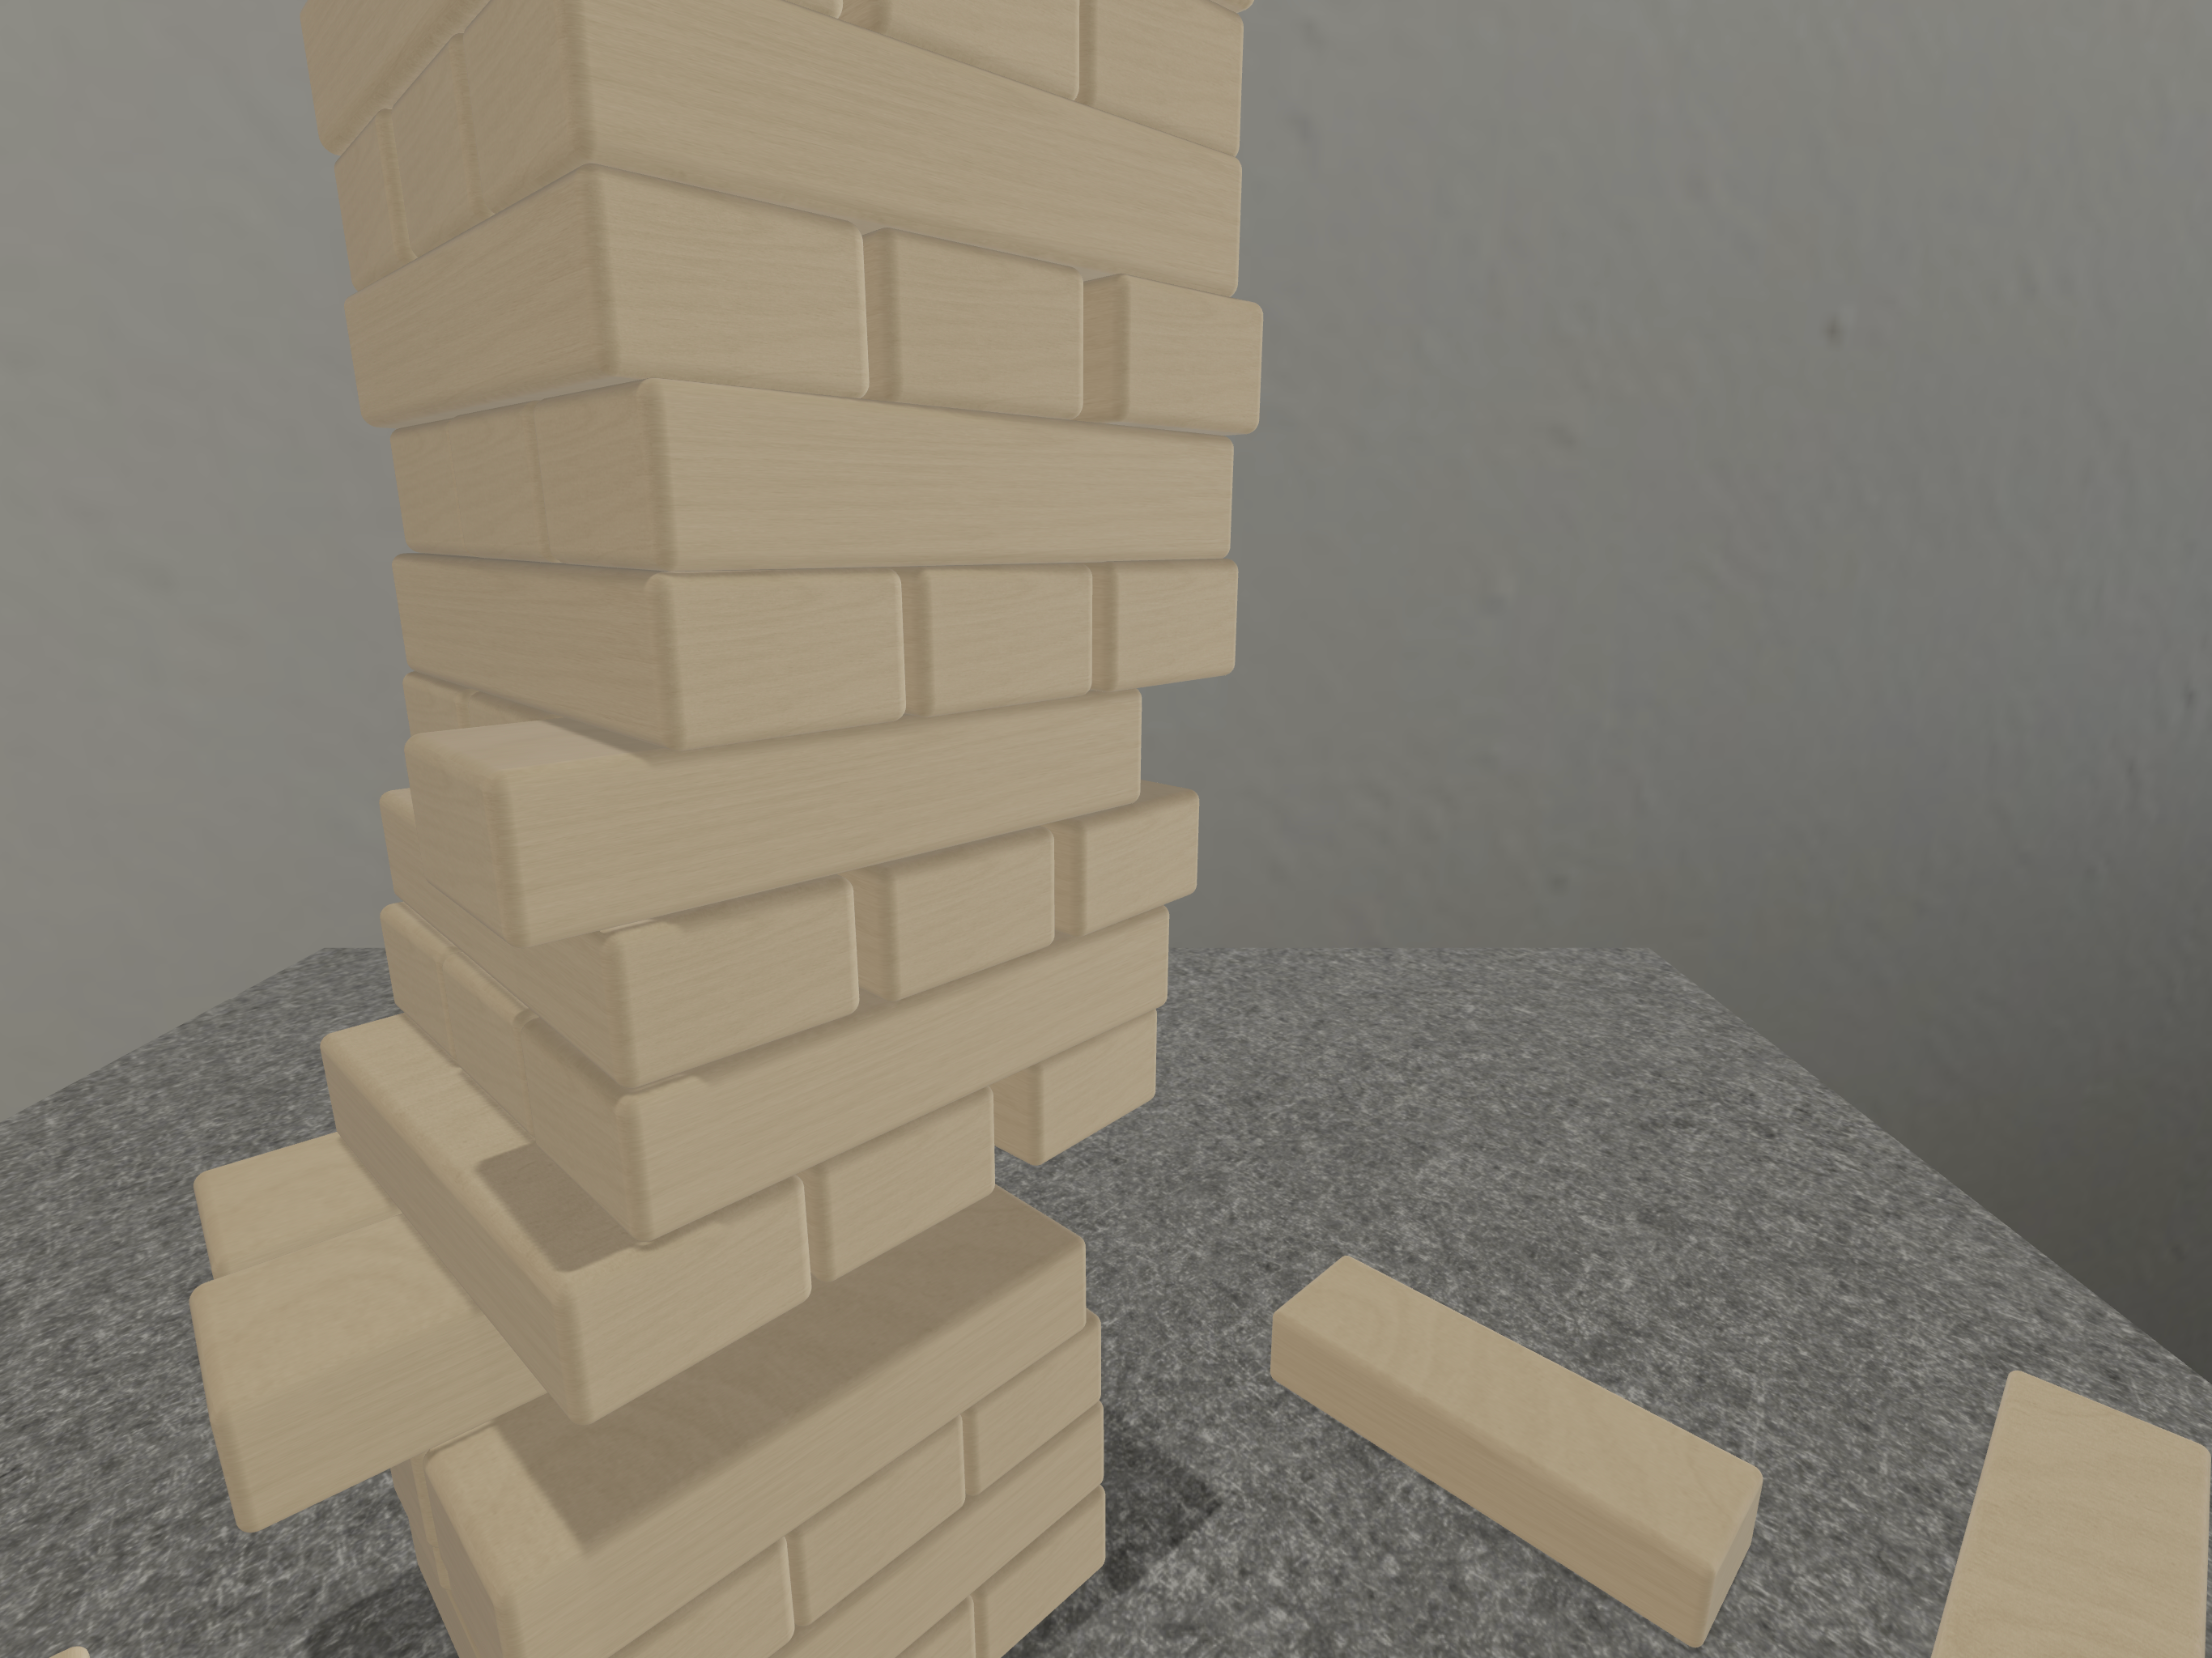 Textured blocks featuring a wooden material